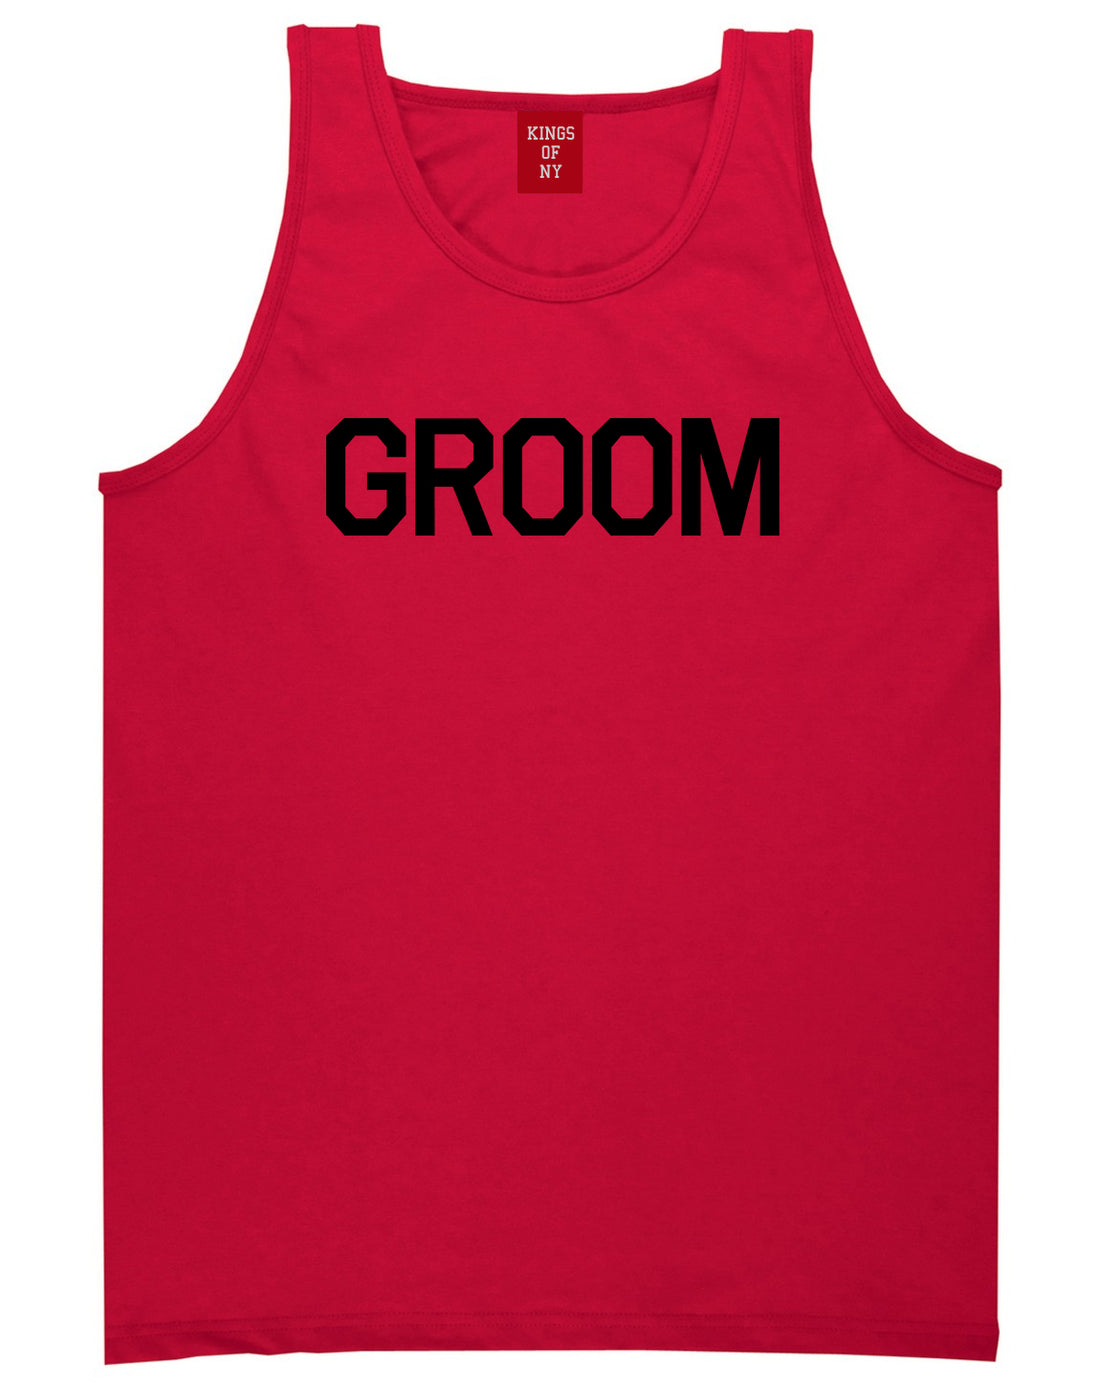 The Groom Bachelor Party Red Tank Top Shirt by Kings Of NY